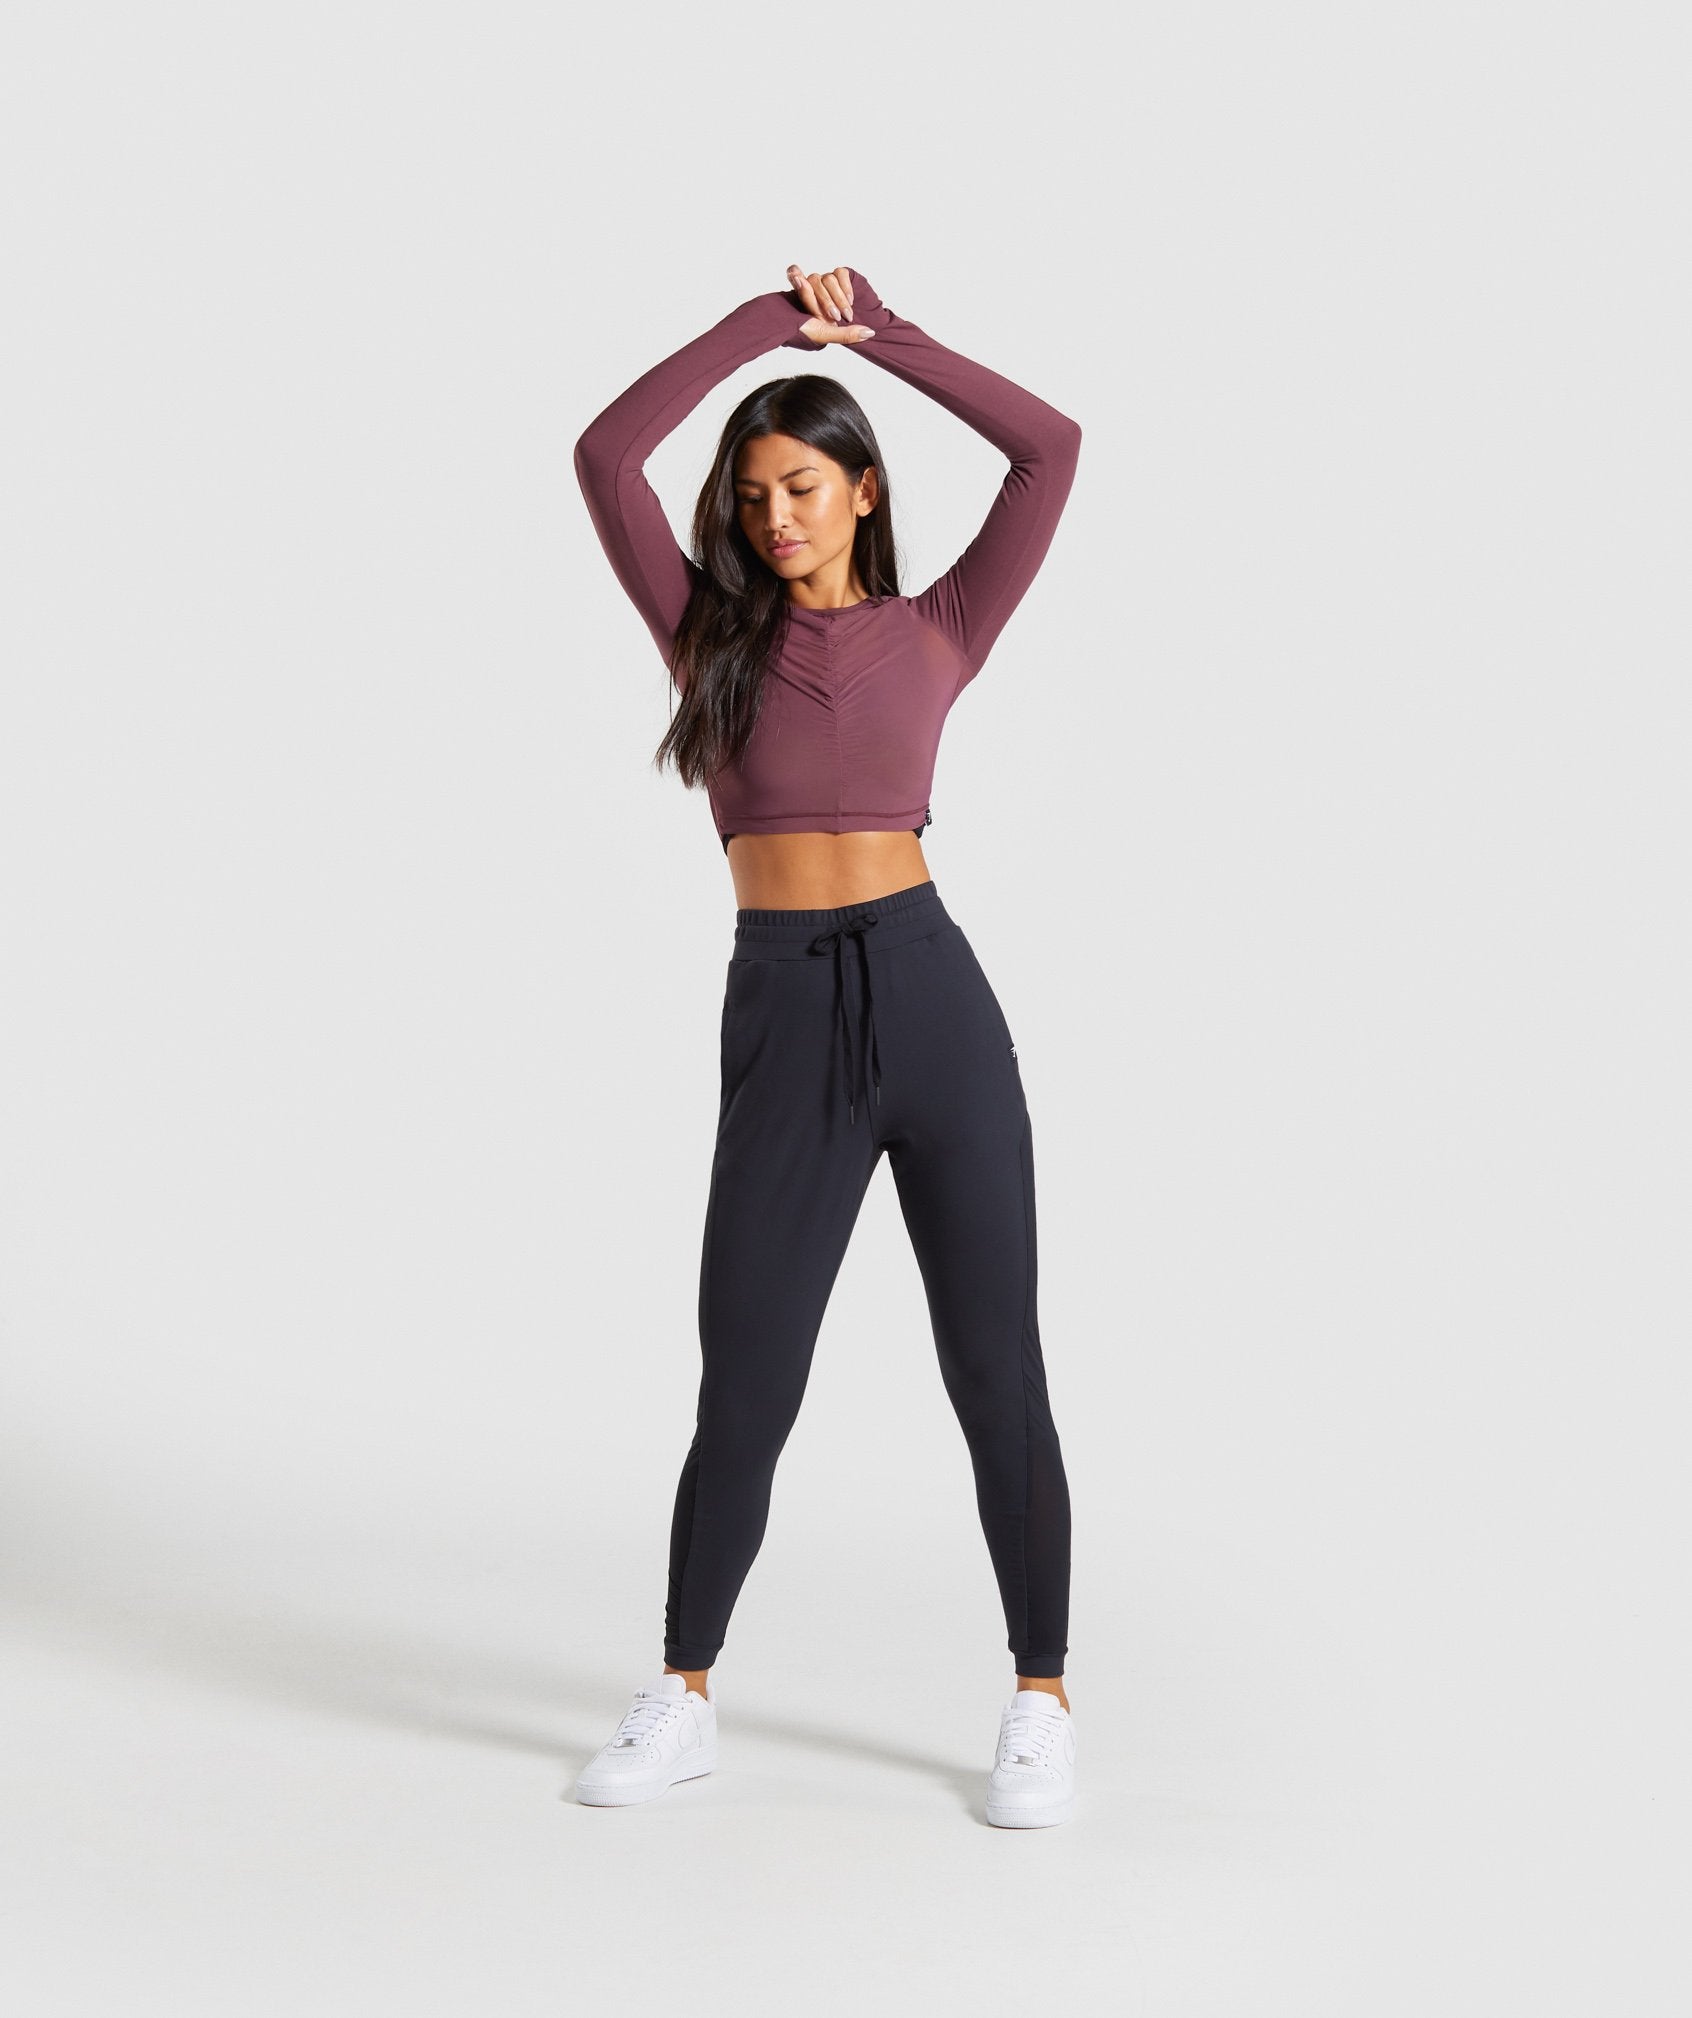 Aura Crop Top in Berry Red - view 4